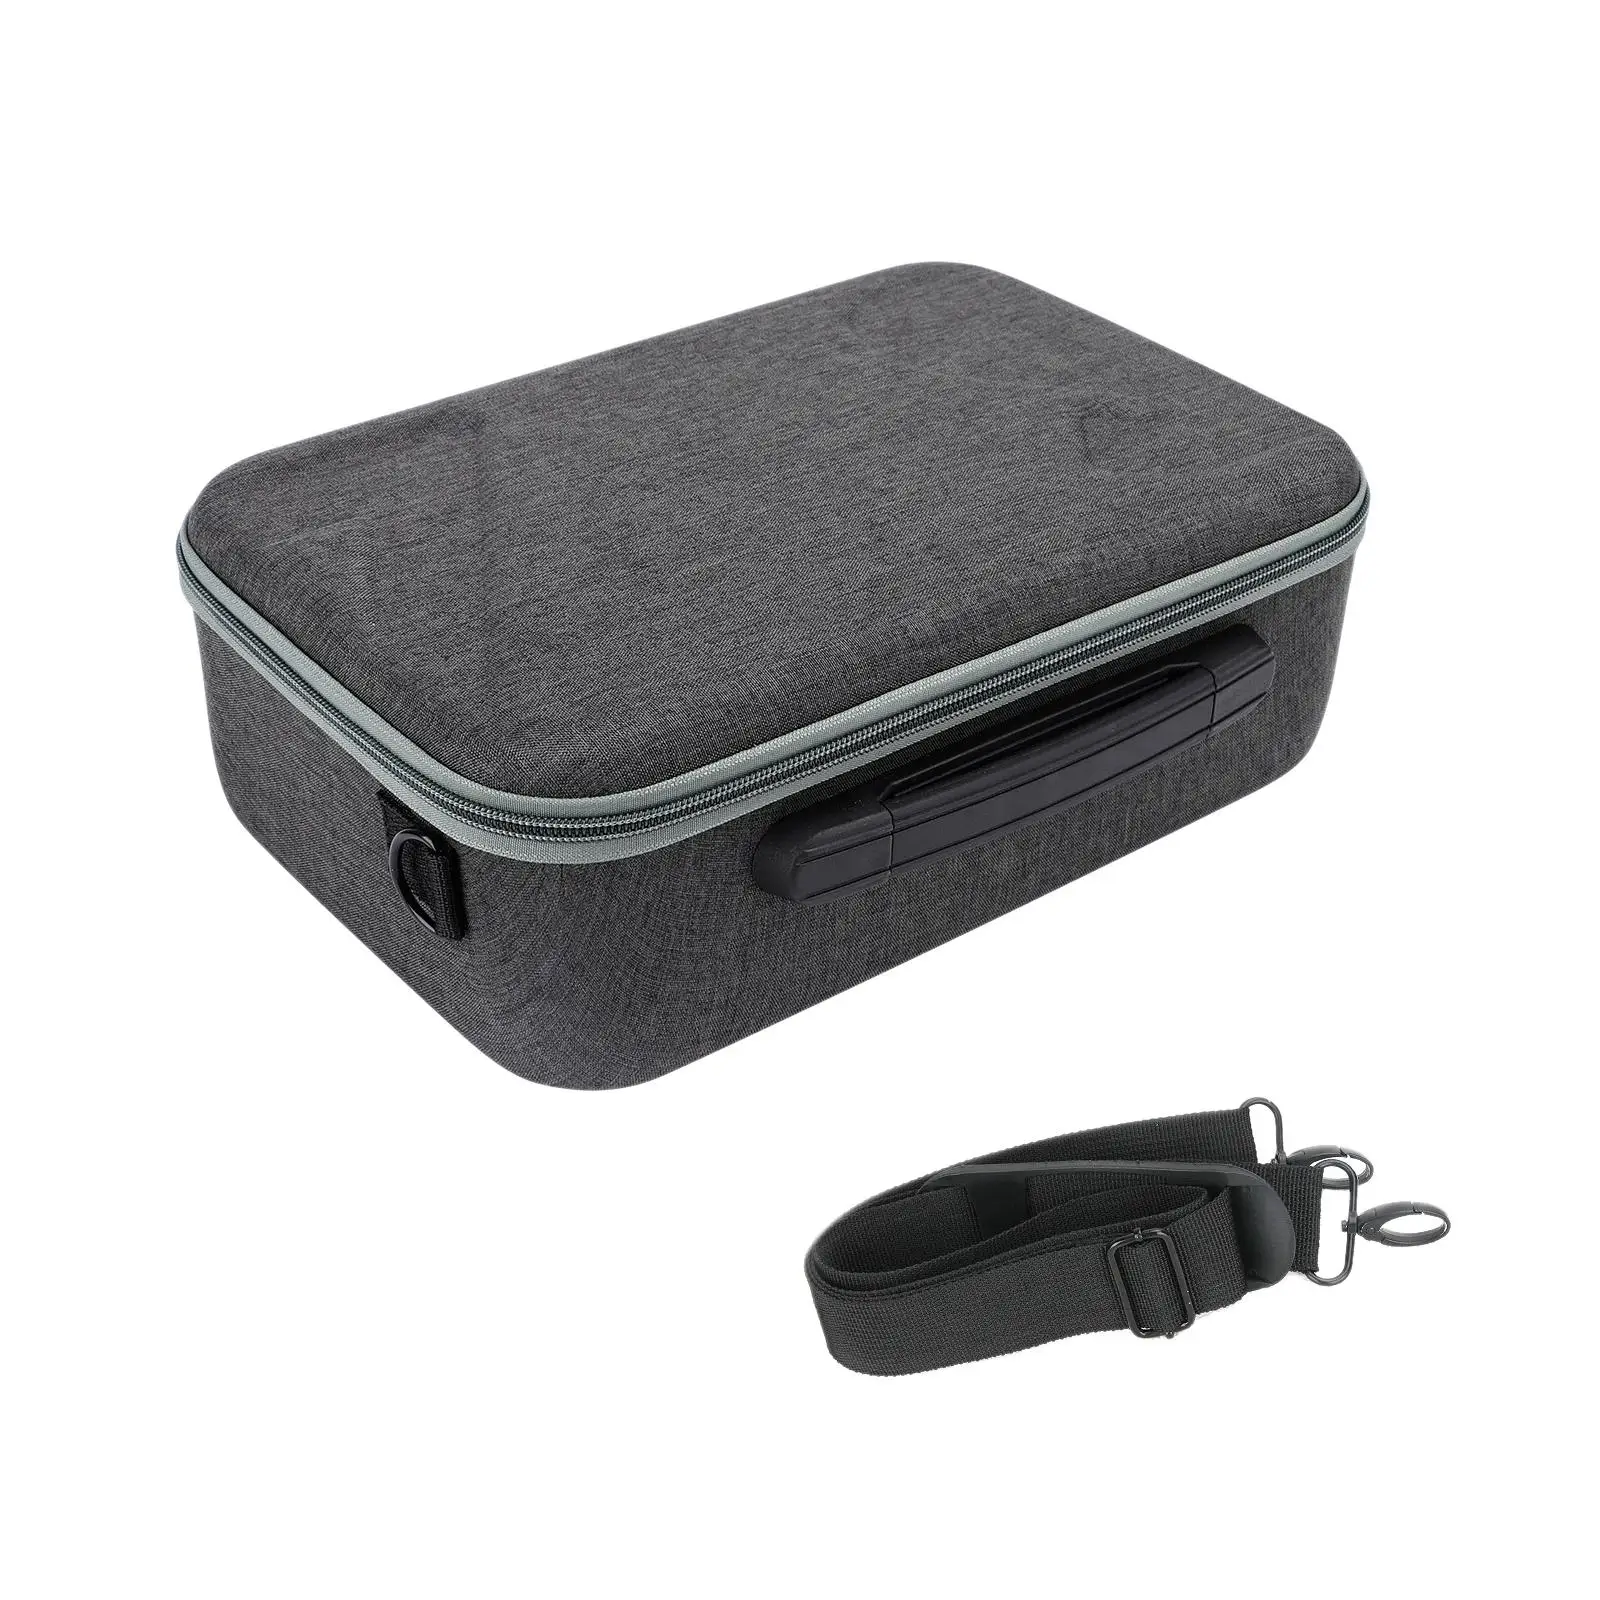 Shockproof Carrying Case for RS 3 Mini Convenient to Carry Color Black EVA Top Cover